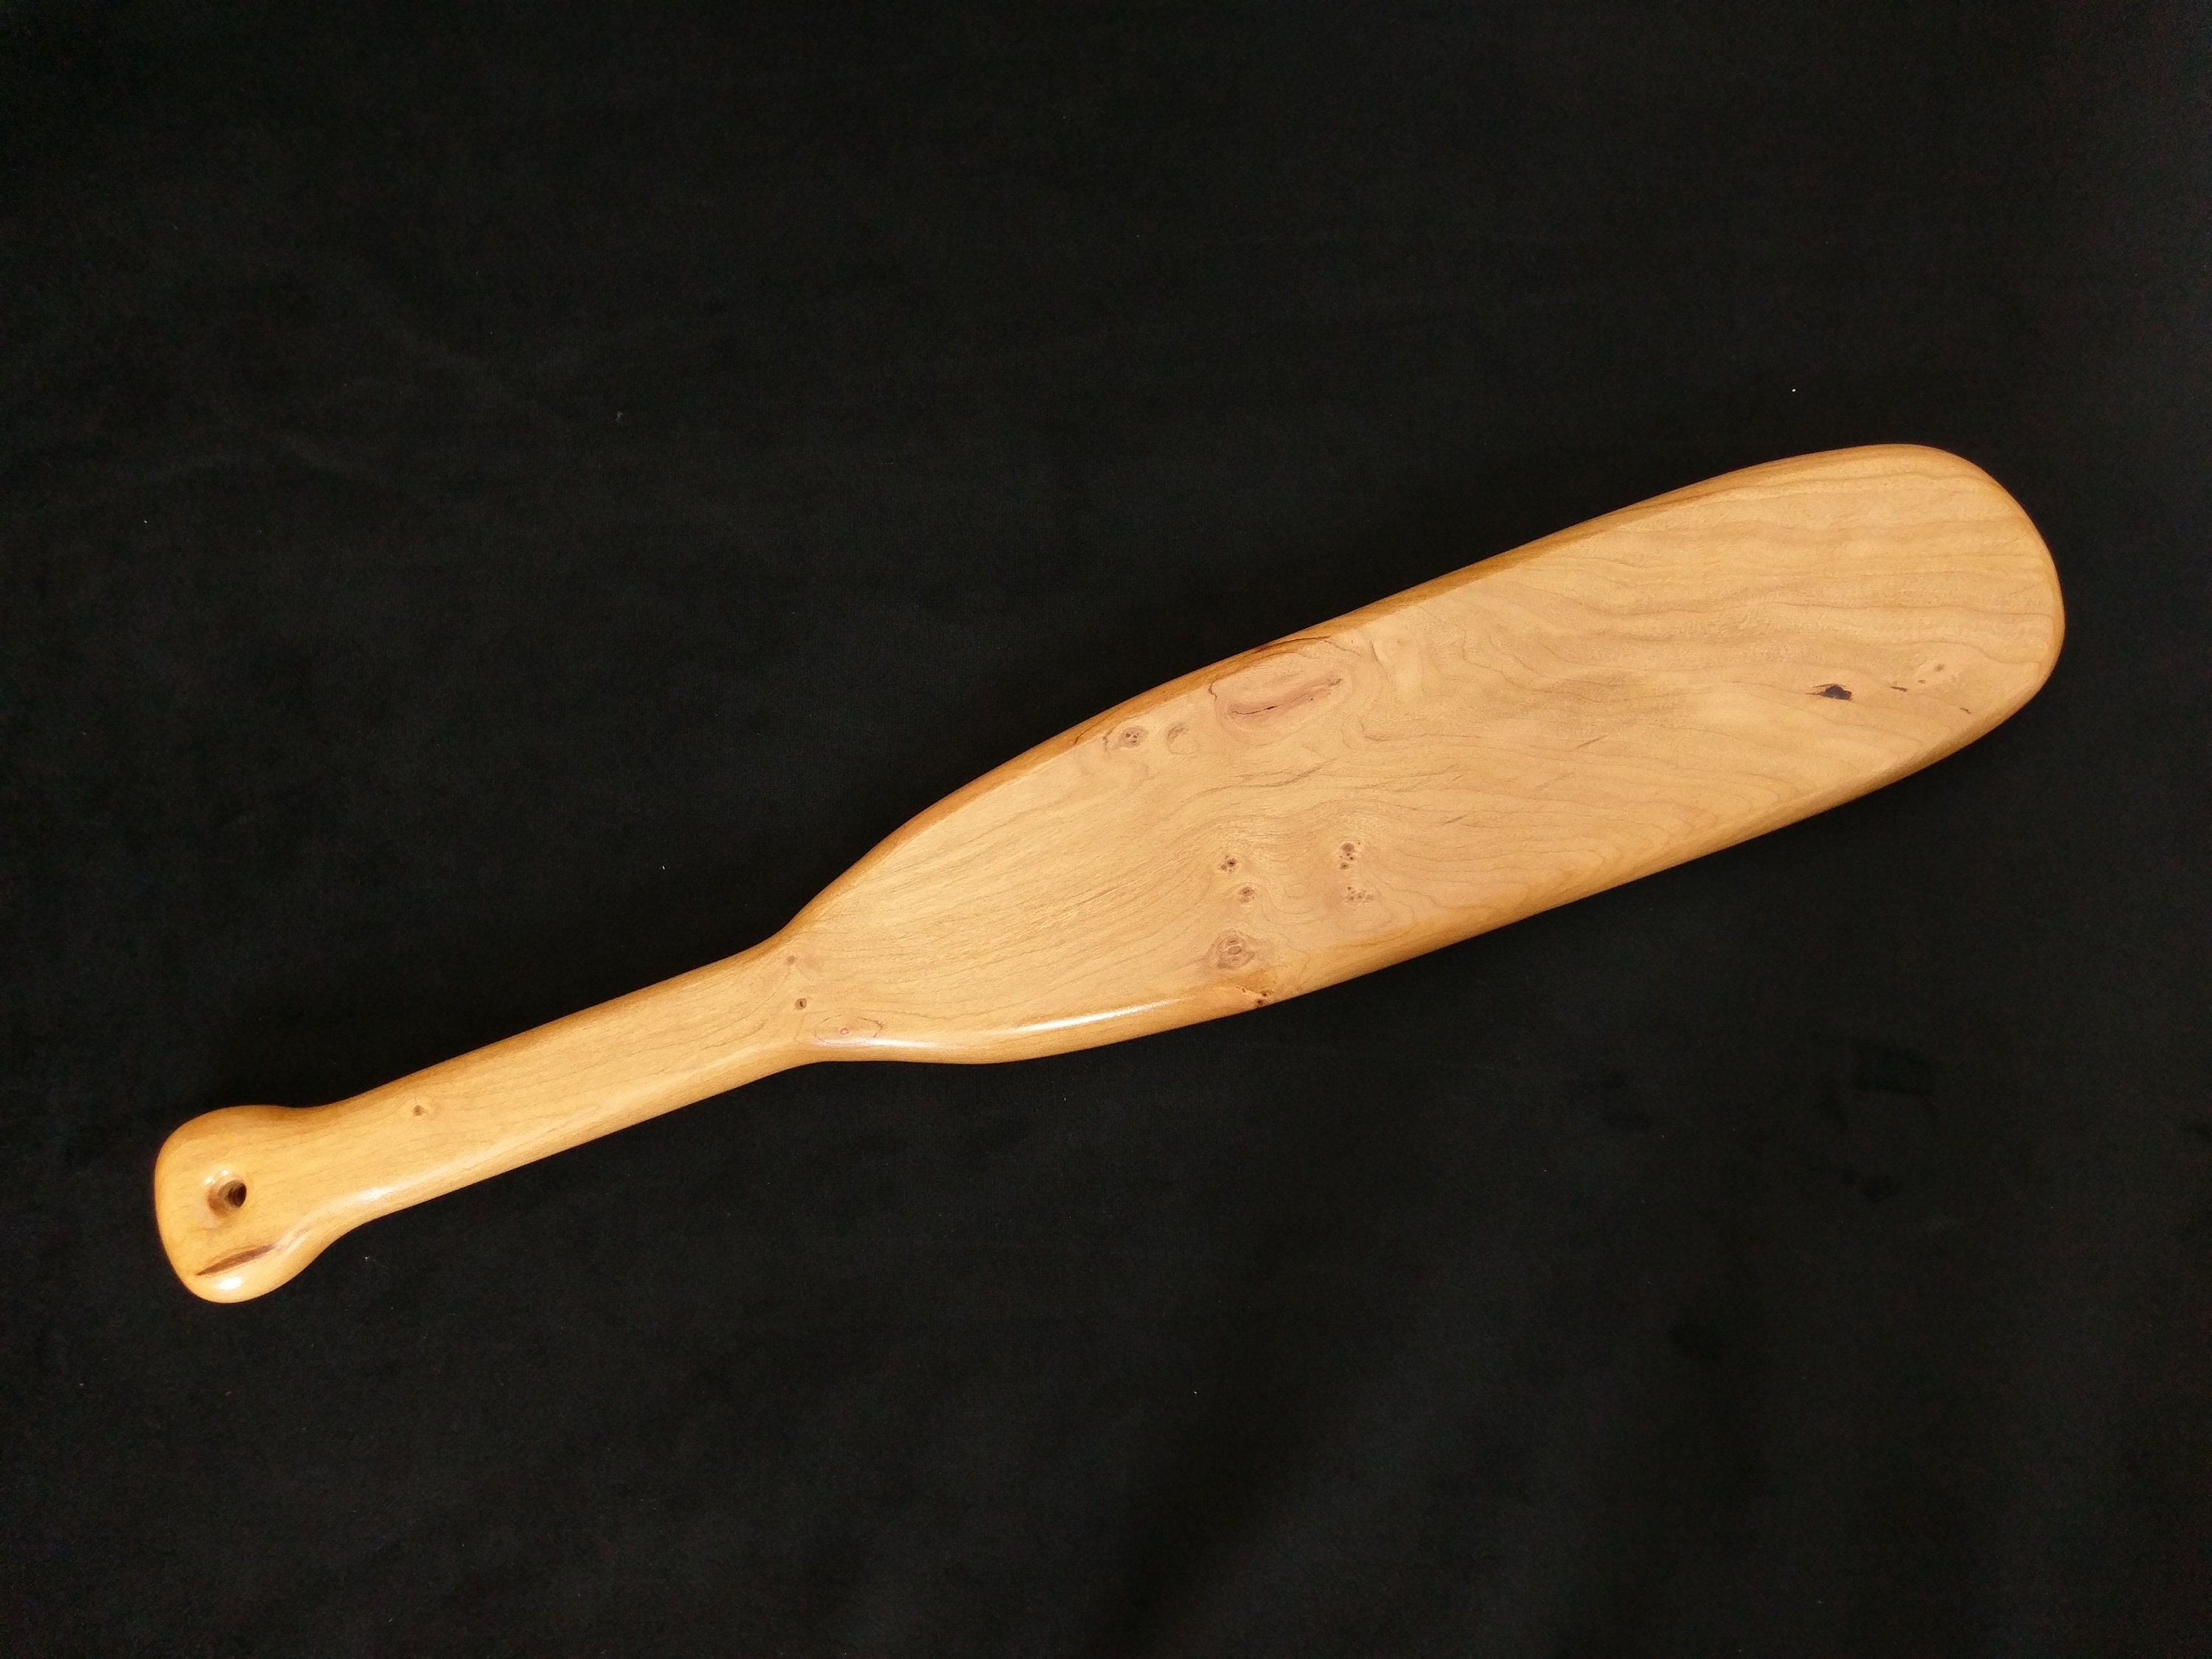 Cherry spanking paddle. - Carved Kink